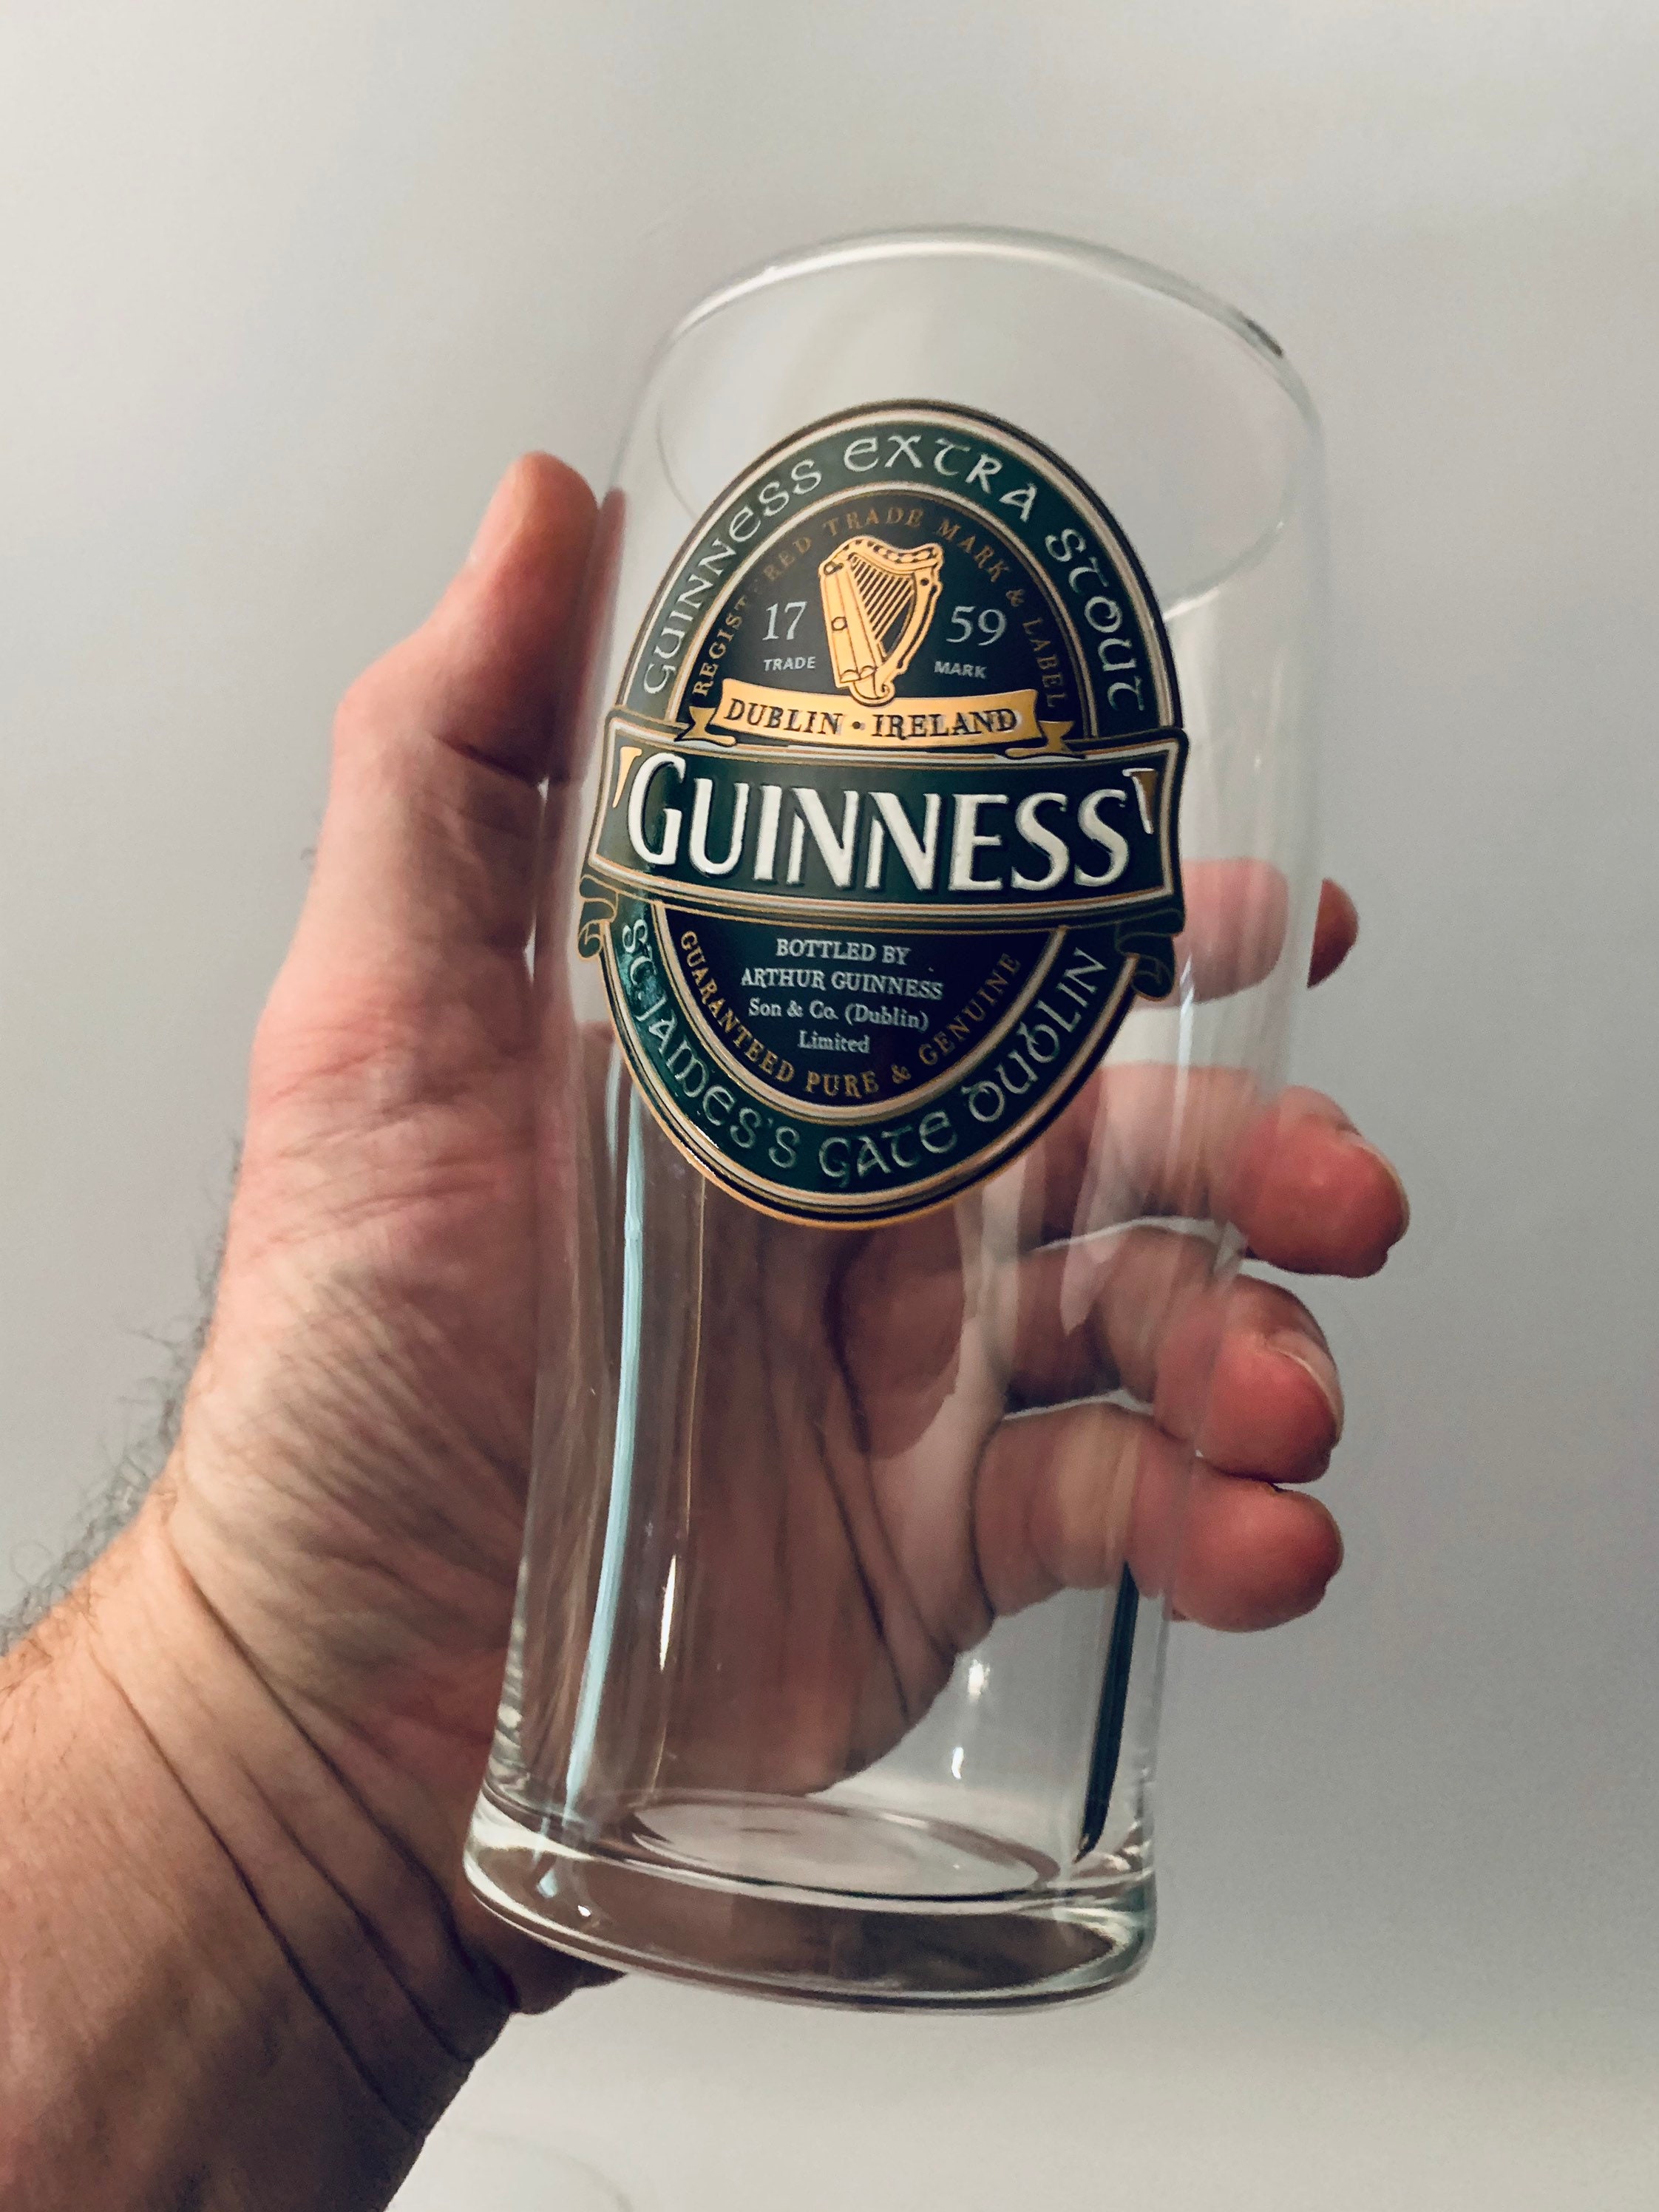 Guinness Toucan Custom Engraved Personalized Gravity Pint Beer Glass